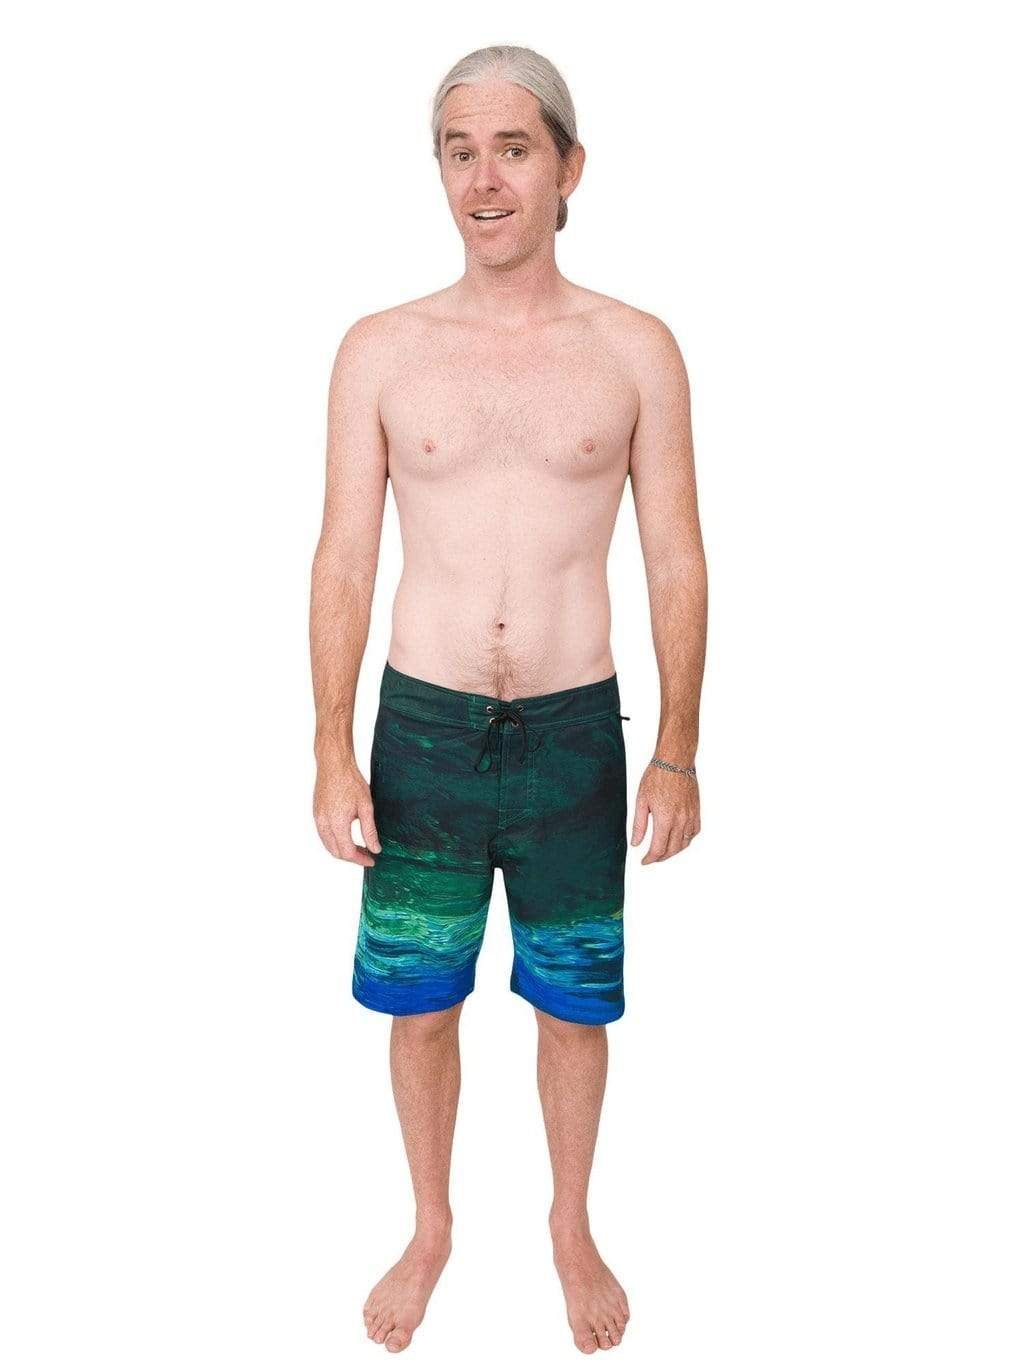 Model: Patrick is the CEO and founder of Waterlust. He is 6&#39;1, 175 lbs and is wearing a size 33.